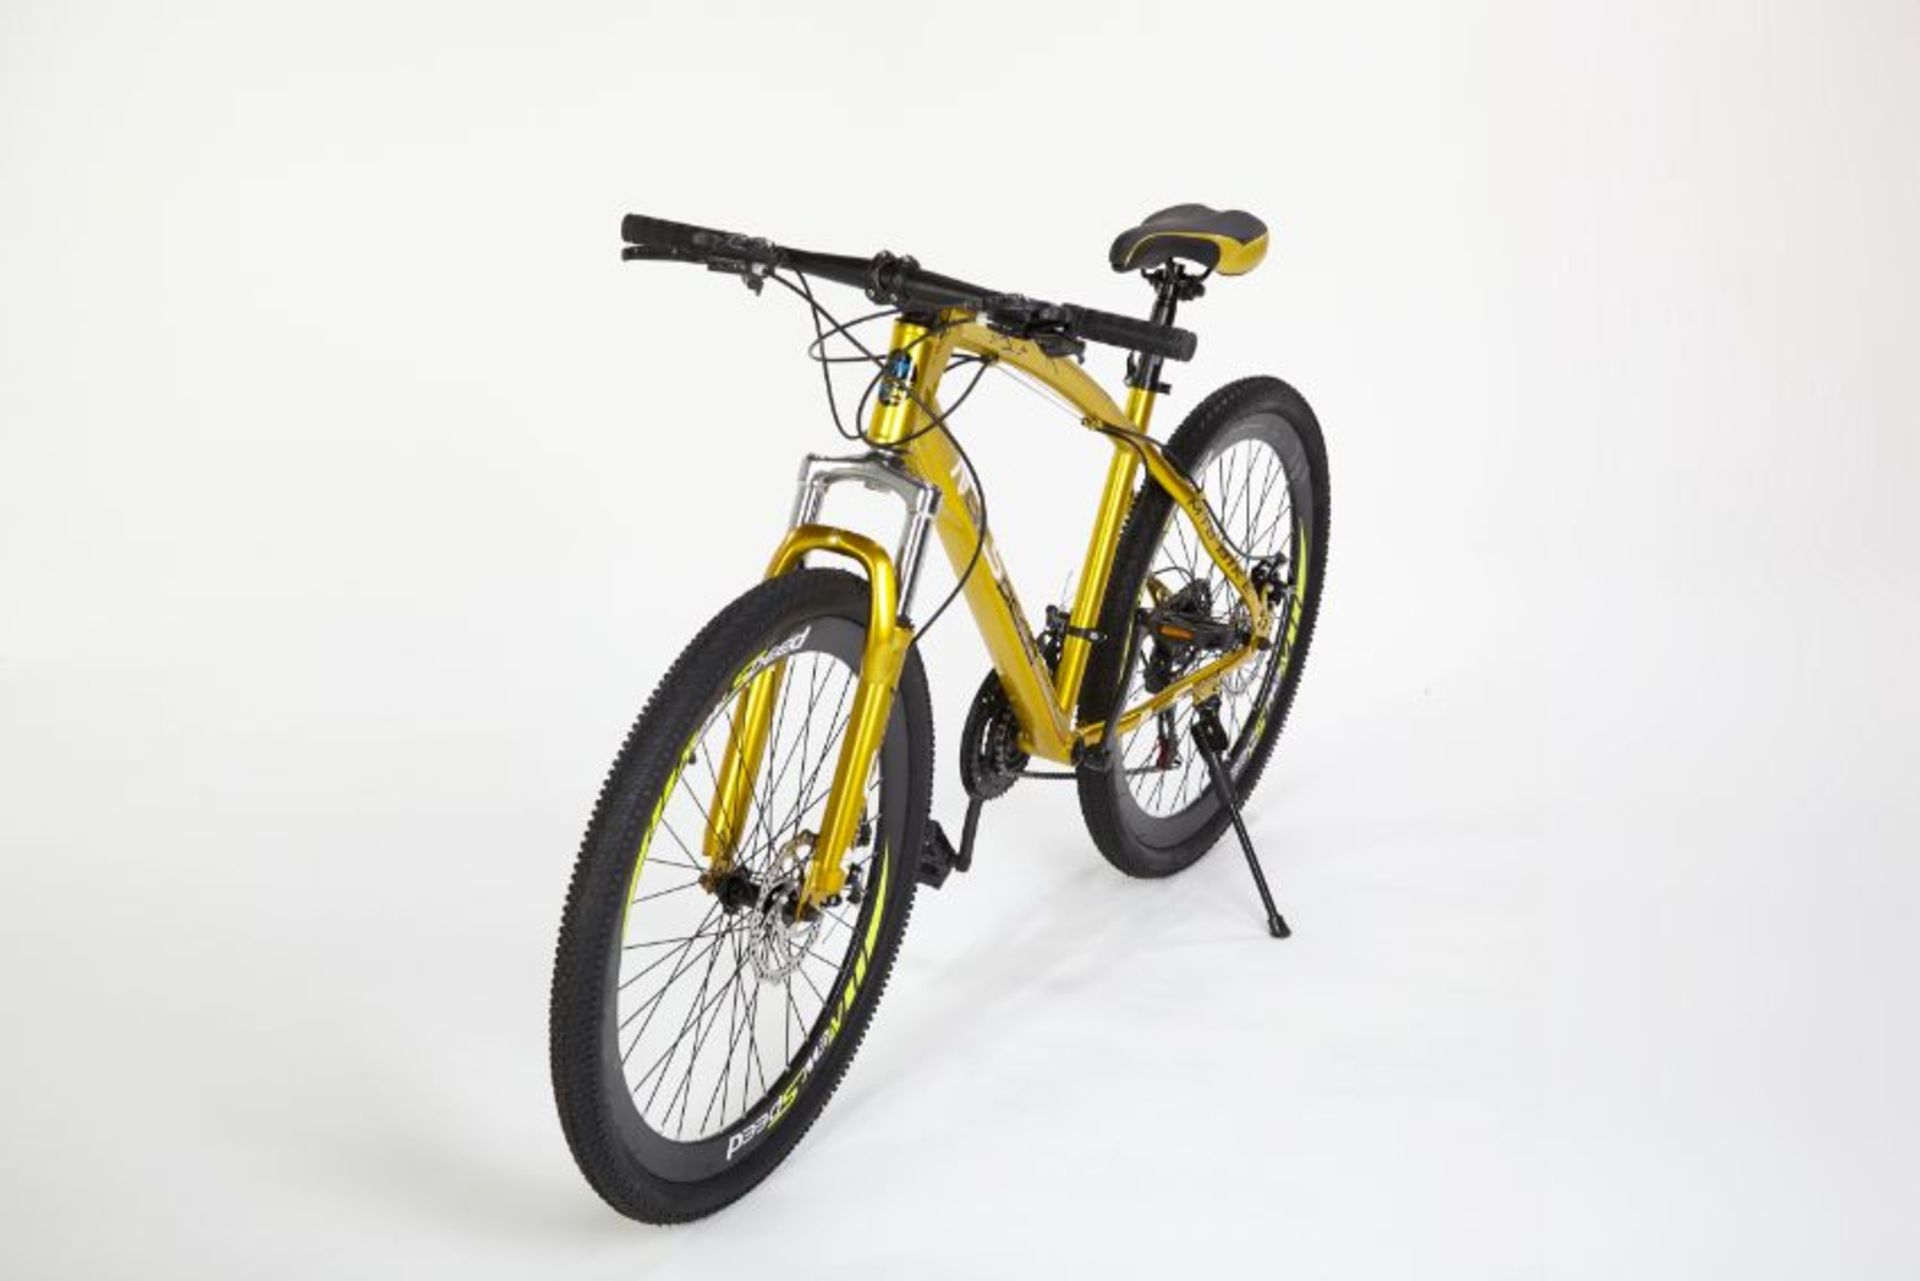 BRAND NEW NEW SPEED 21 GEARS STUNNING SUSPENSION GOLD COLOURED MOUNTAIN BIKE